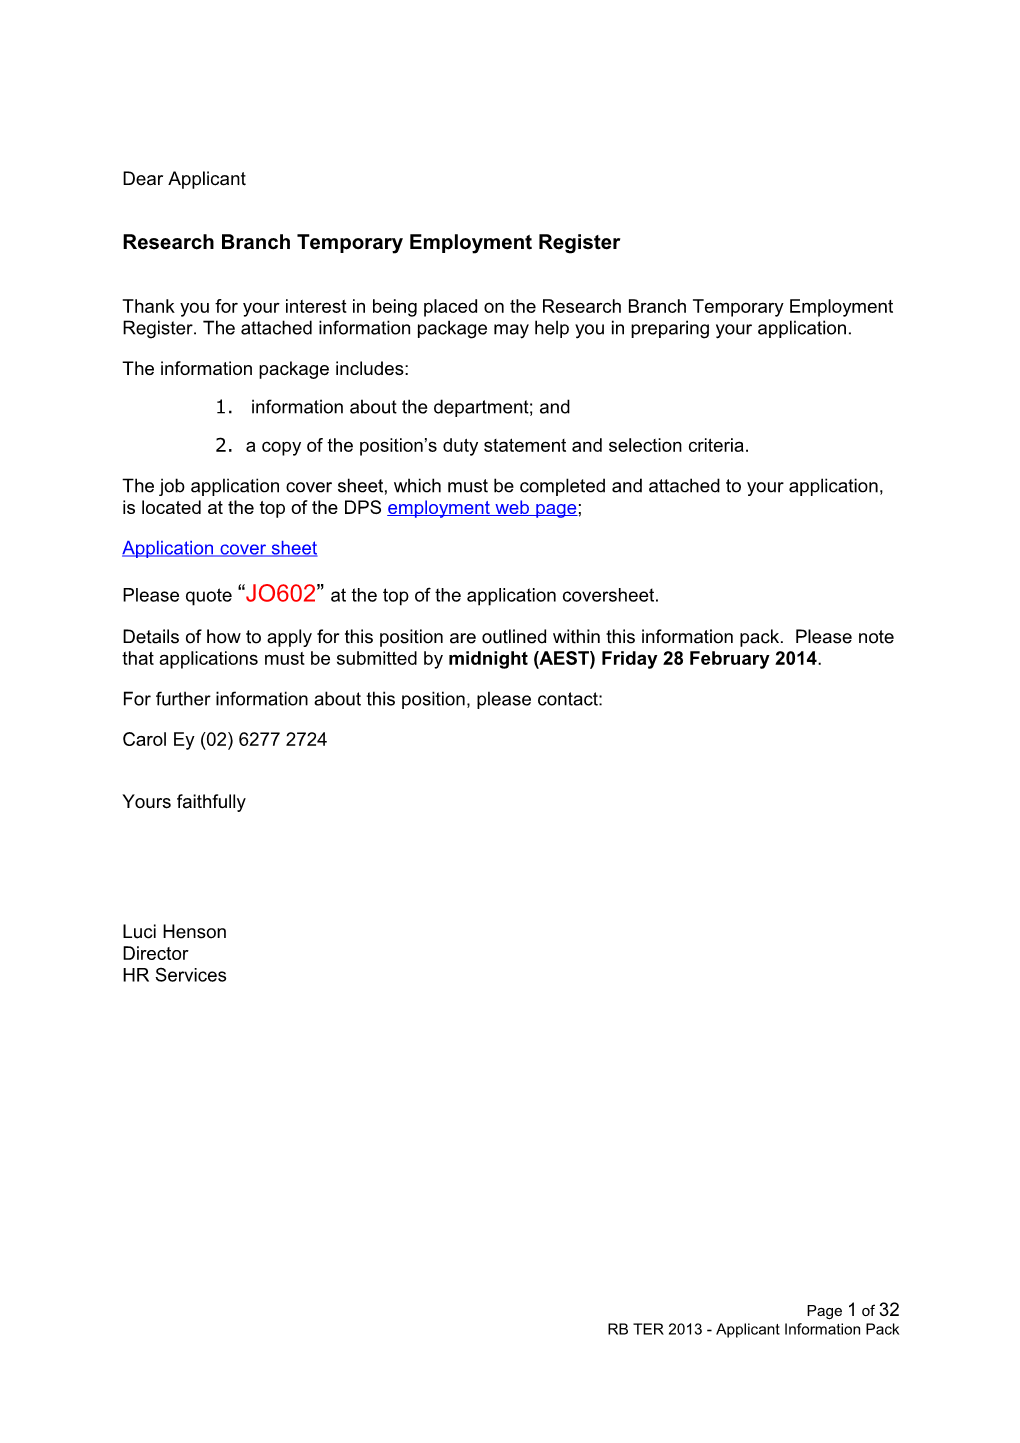 Research Branch Temporary Employment Register